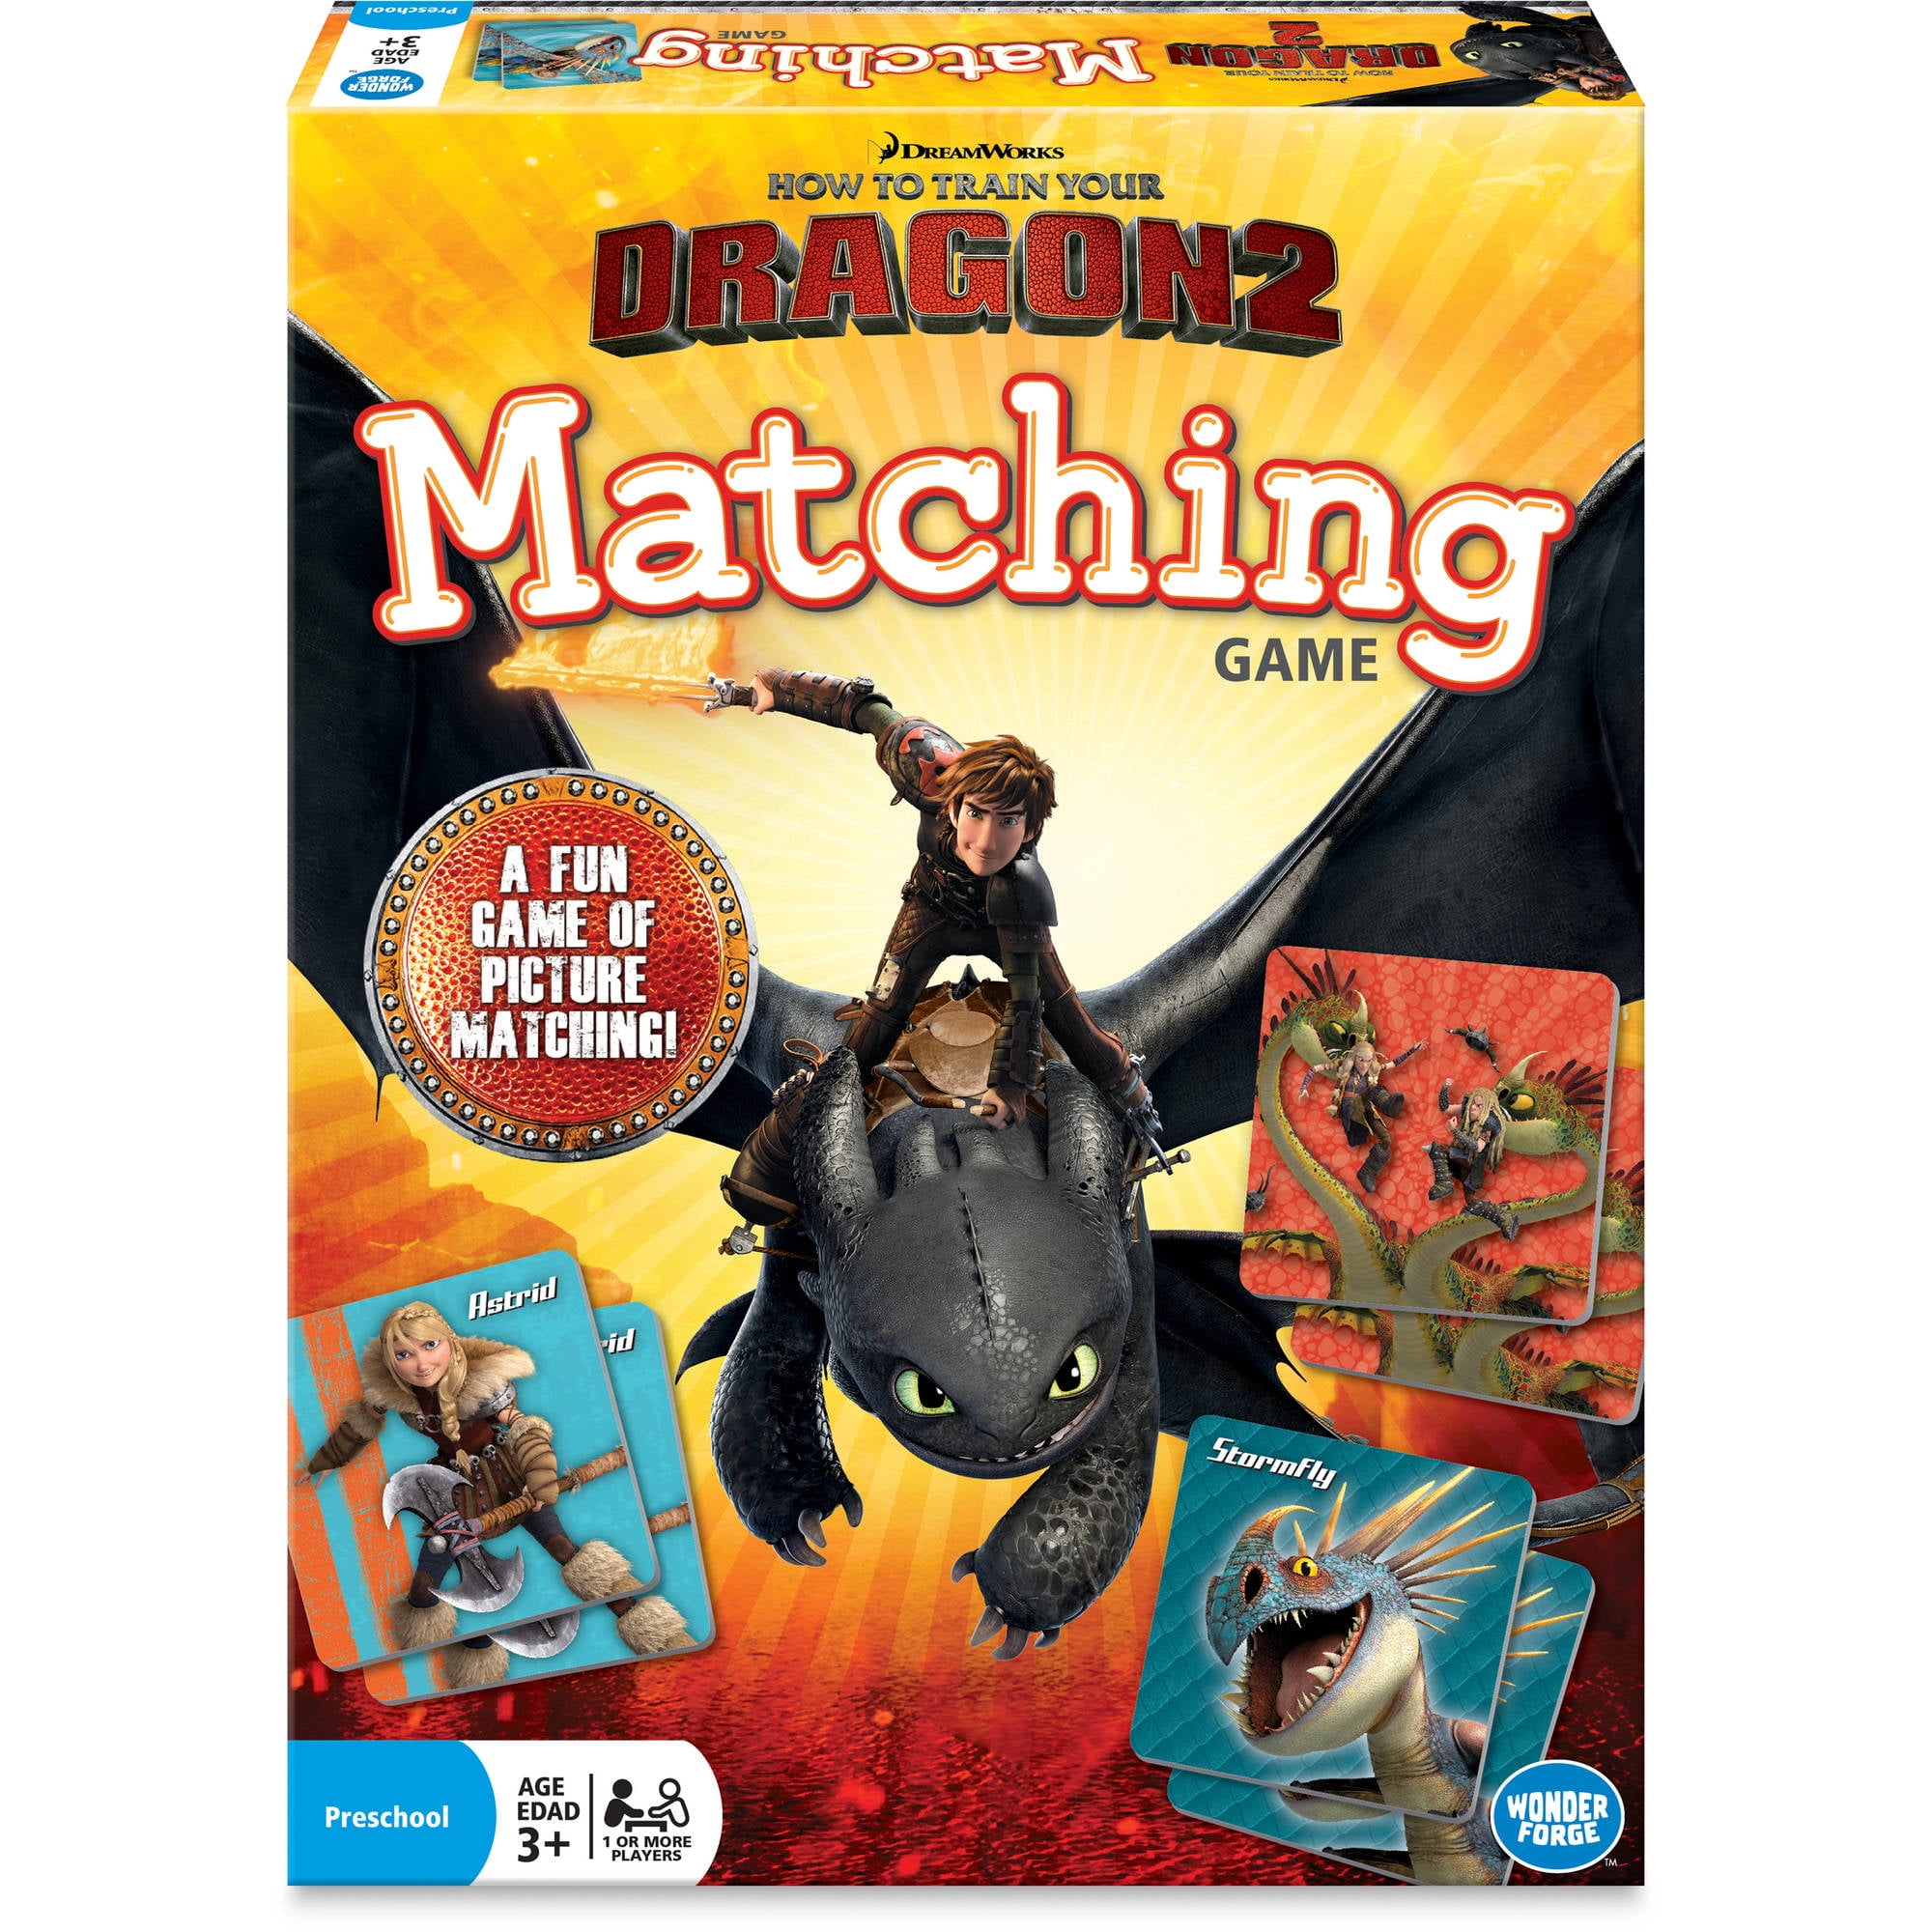 Dream Works How to Train Your Dragon 2 Matching Game Preschool Wonder Forge 